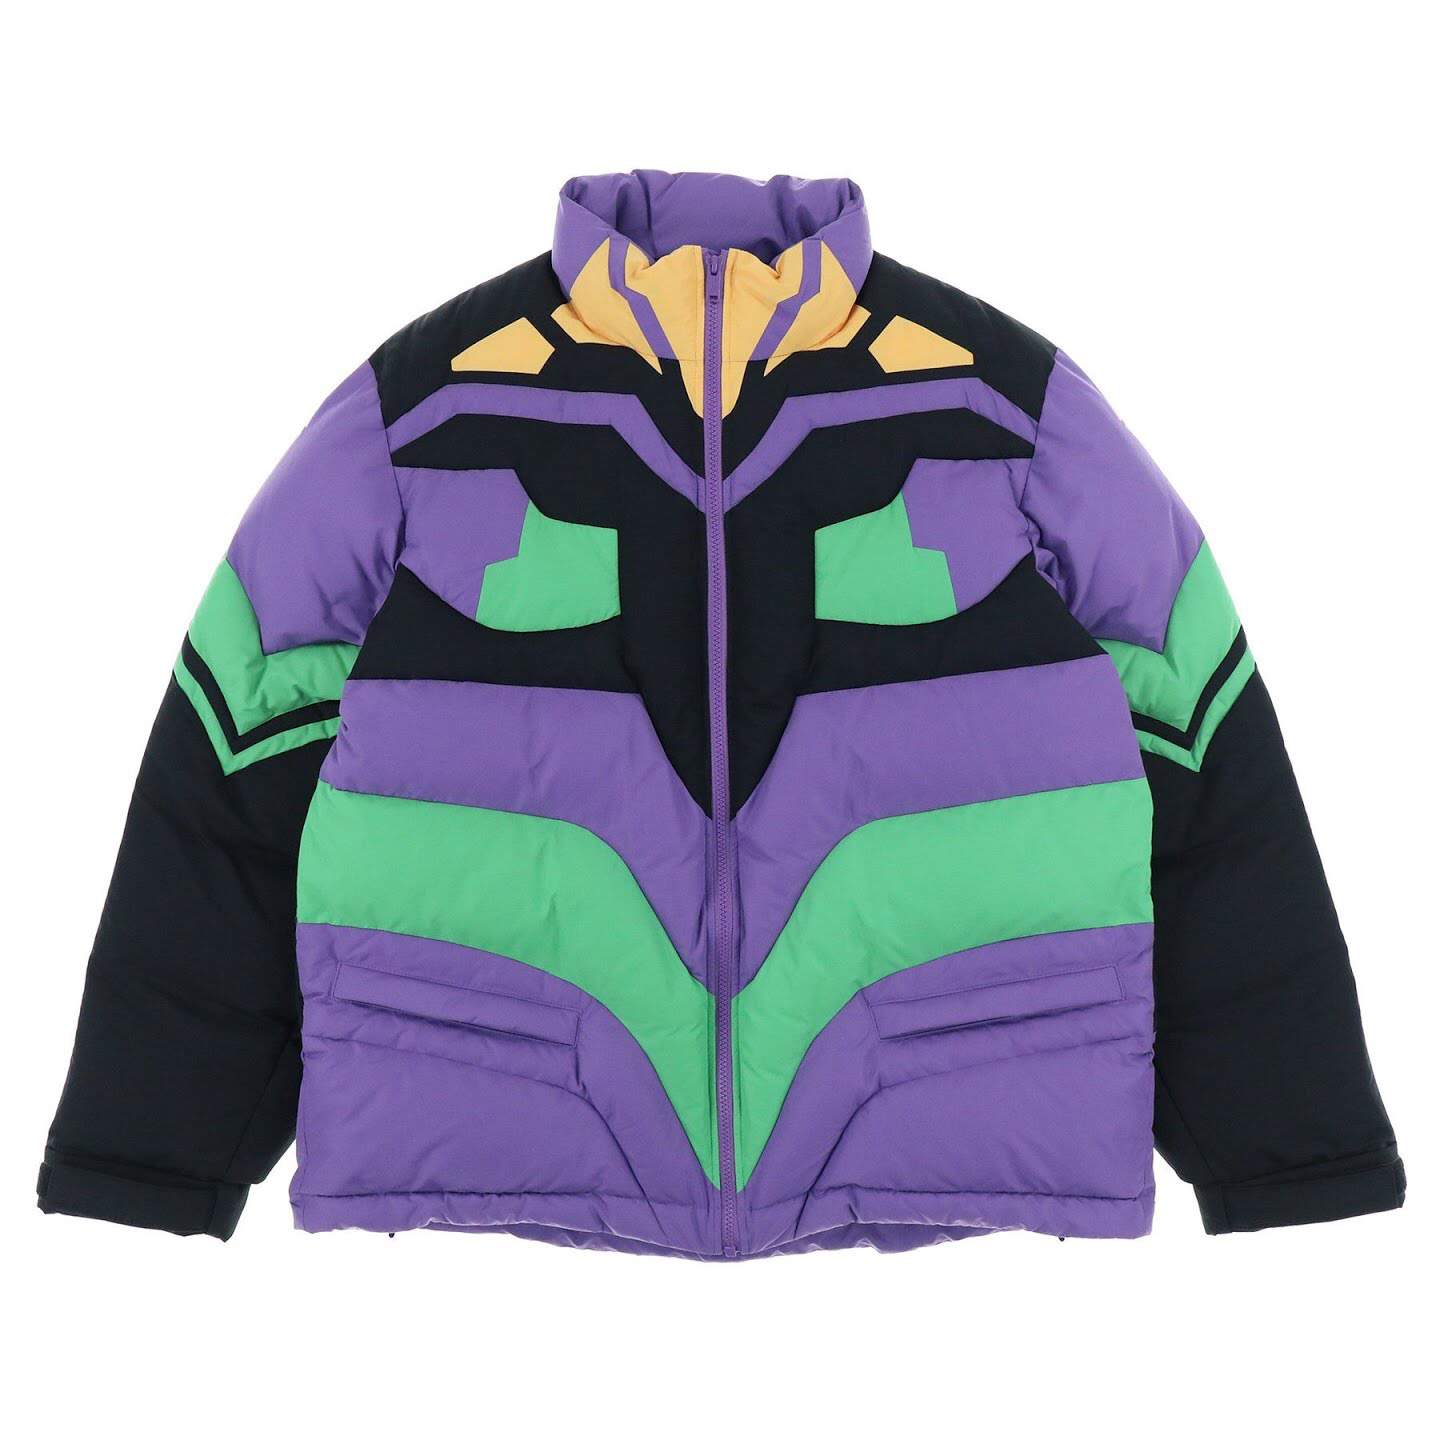 undercover evangelion collab for sale